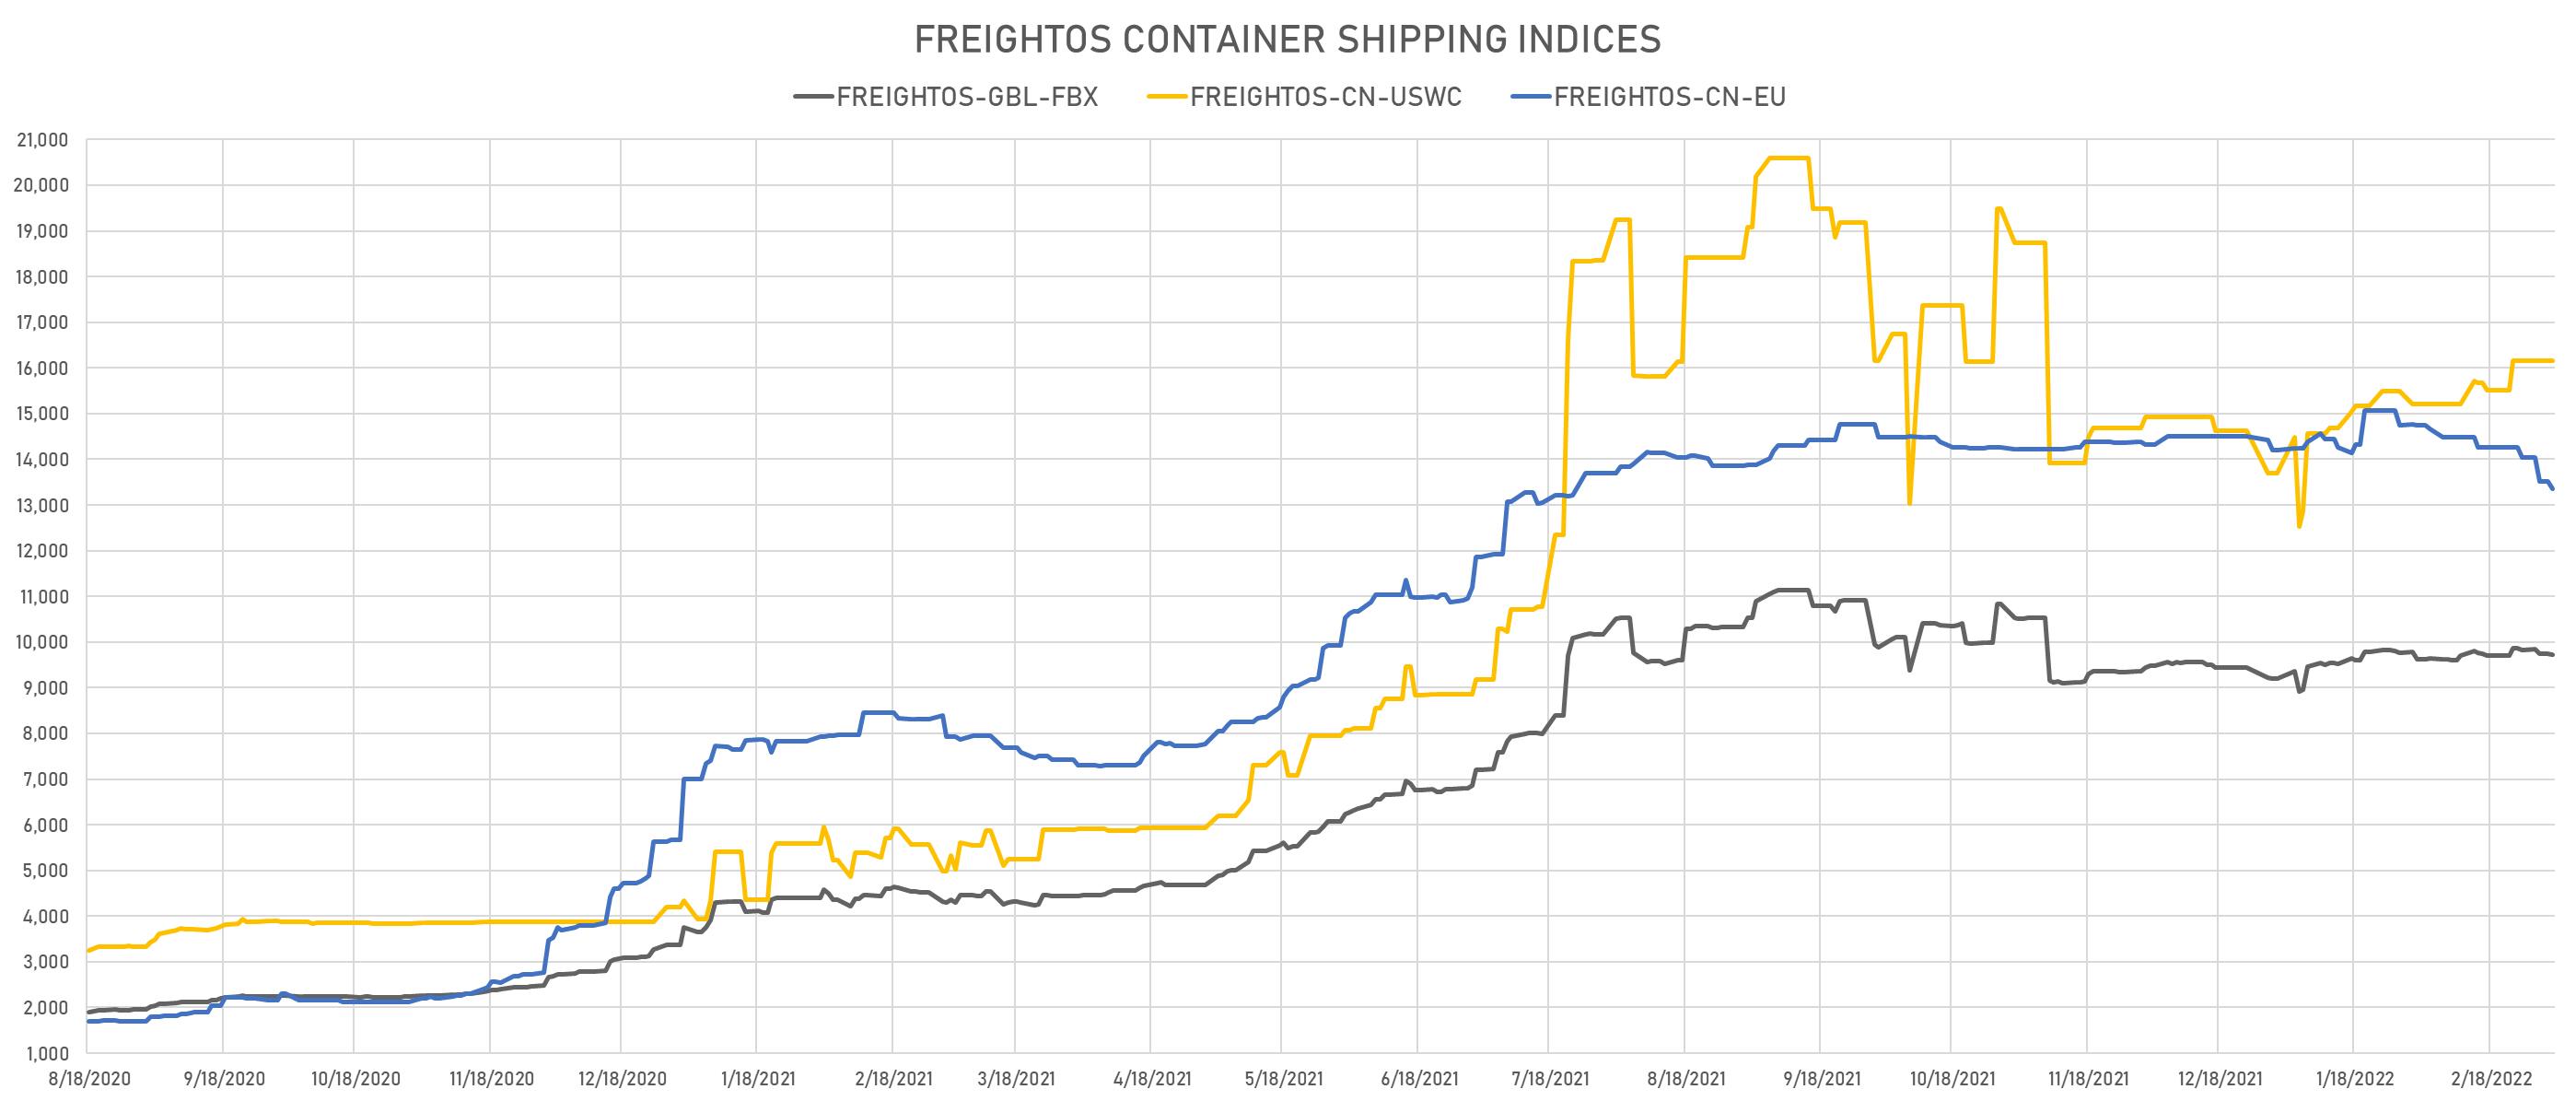 Freightos Container Shipping Indices | Sources: phipost.com, Refinitiv data